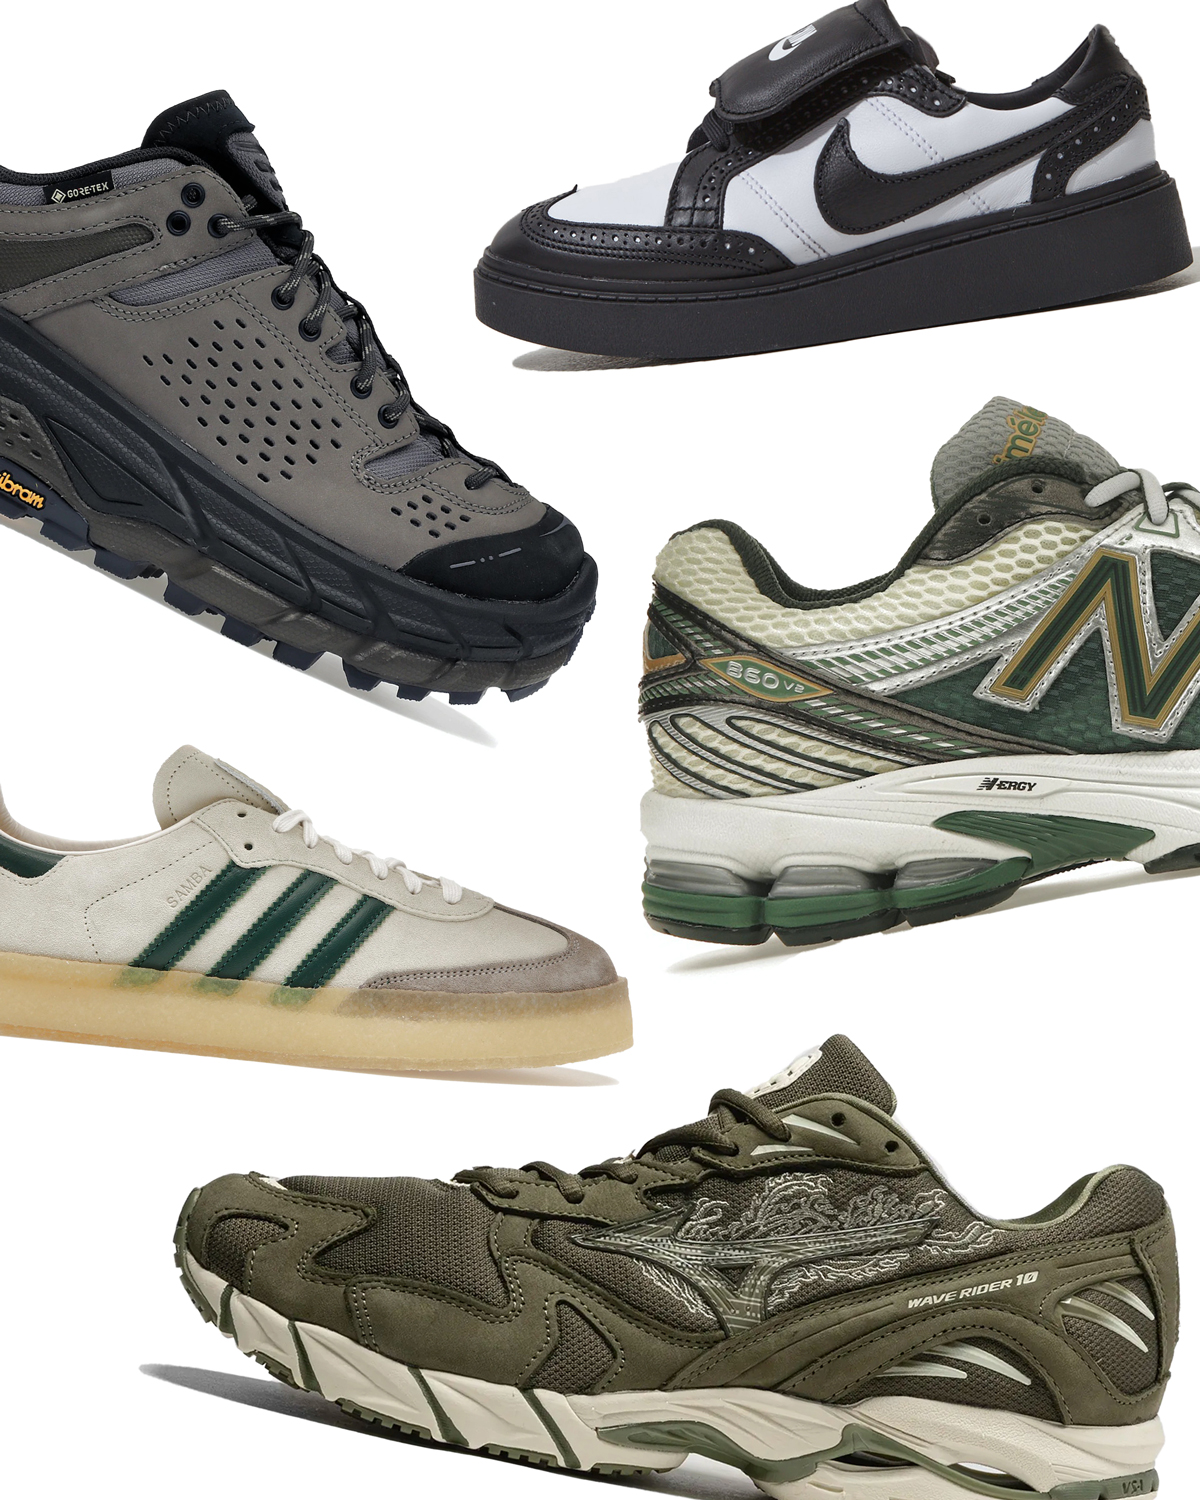 10 Hyped Sneakers All Sneakerheads Should Own In 2023